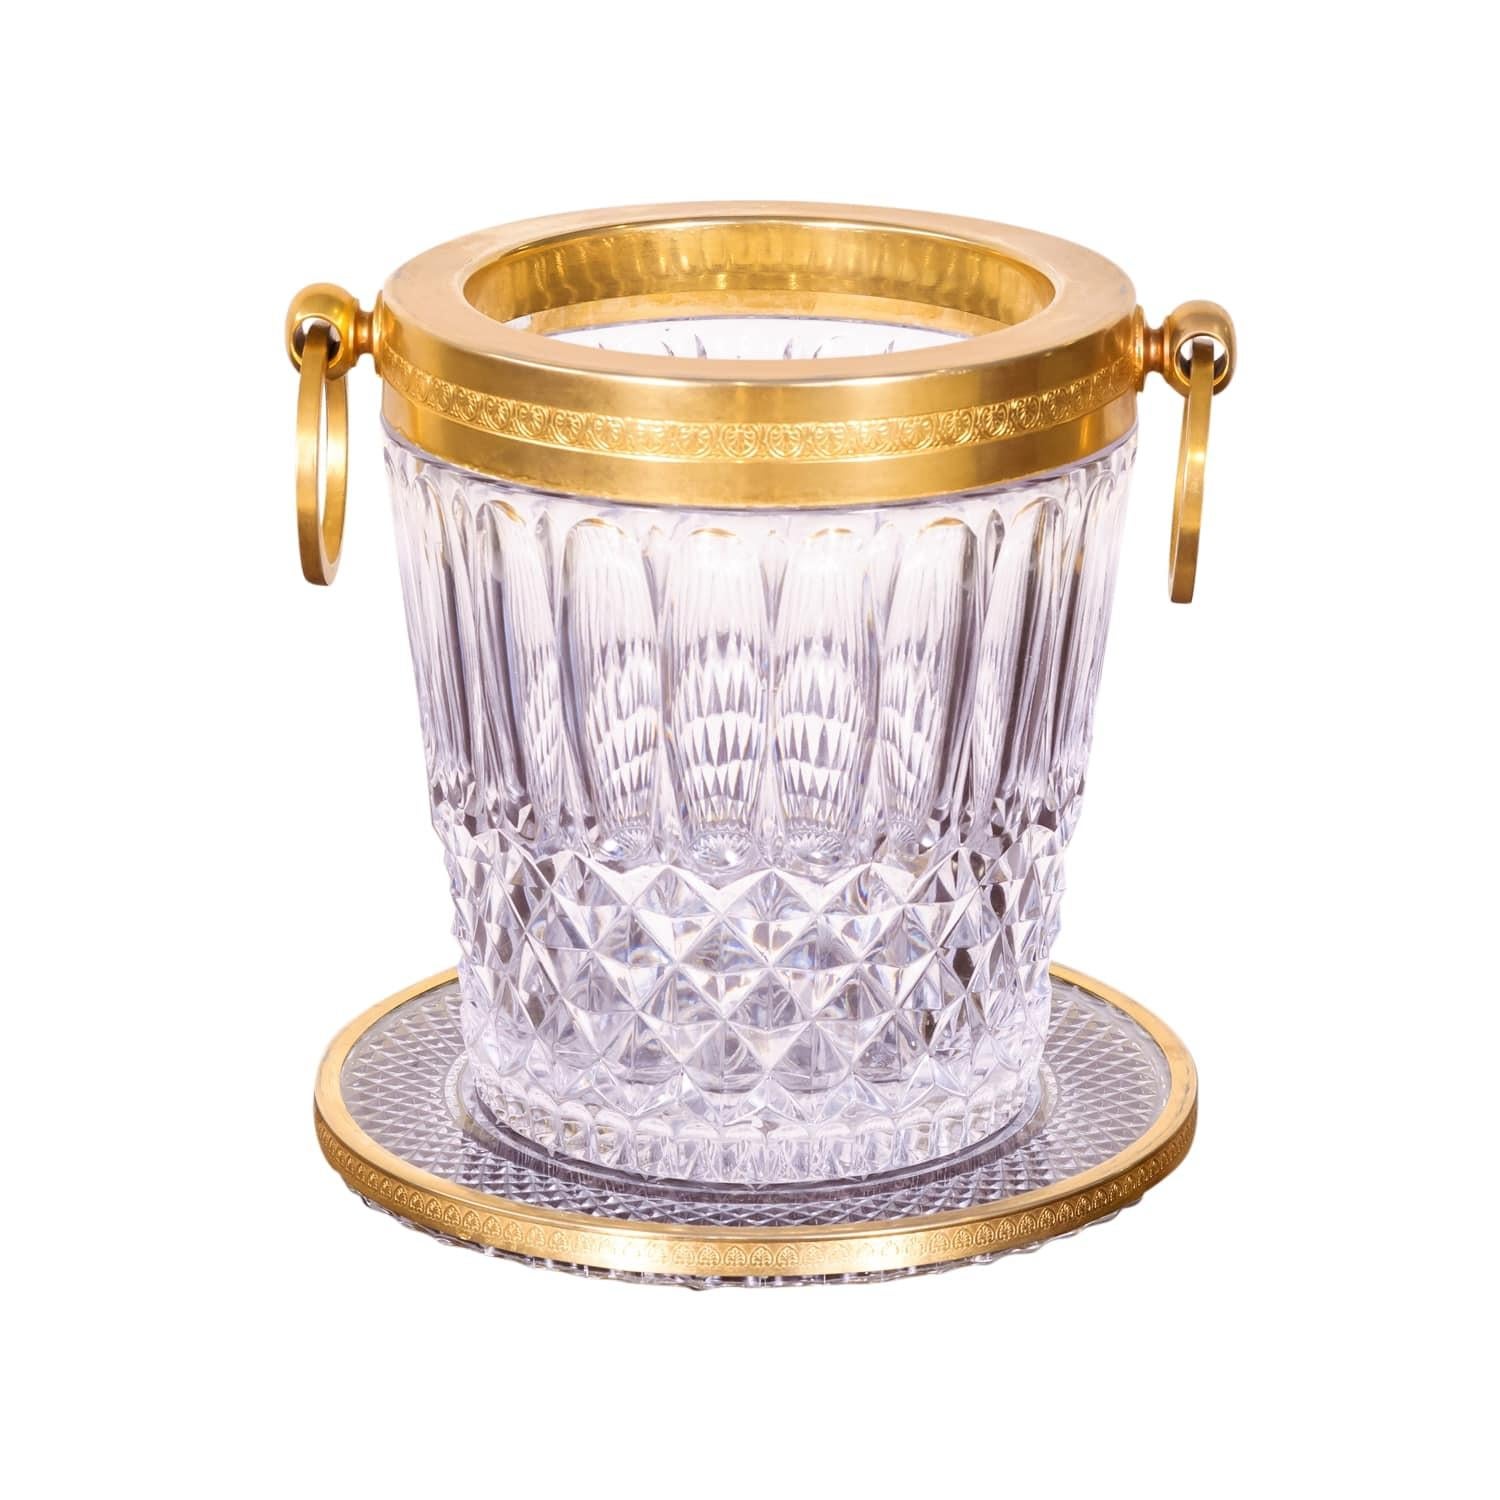 Beautiful vintage French cut glass champagne ice bucket with etched brass rim and ring handles having a matching cut glass and brass tray to keep splatters and water off the table, circa 1930s. Use yours to hold ice for a party or a lovely flower